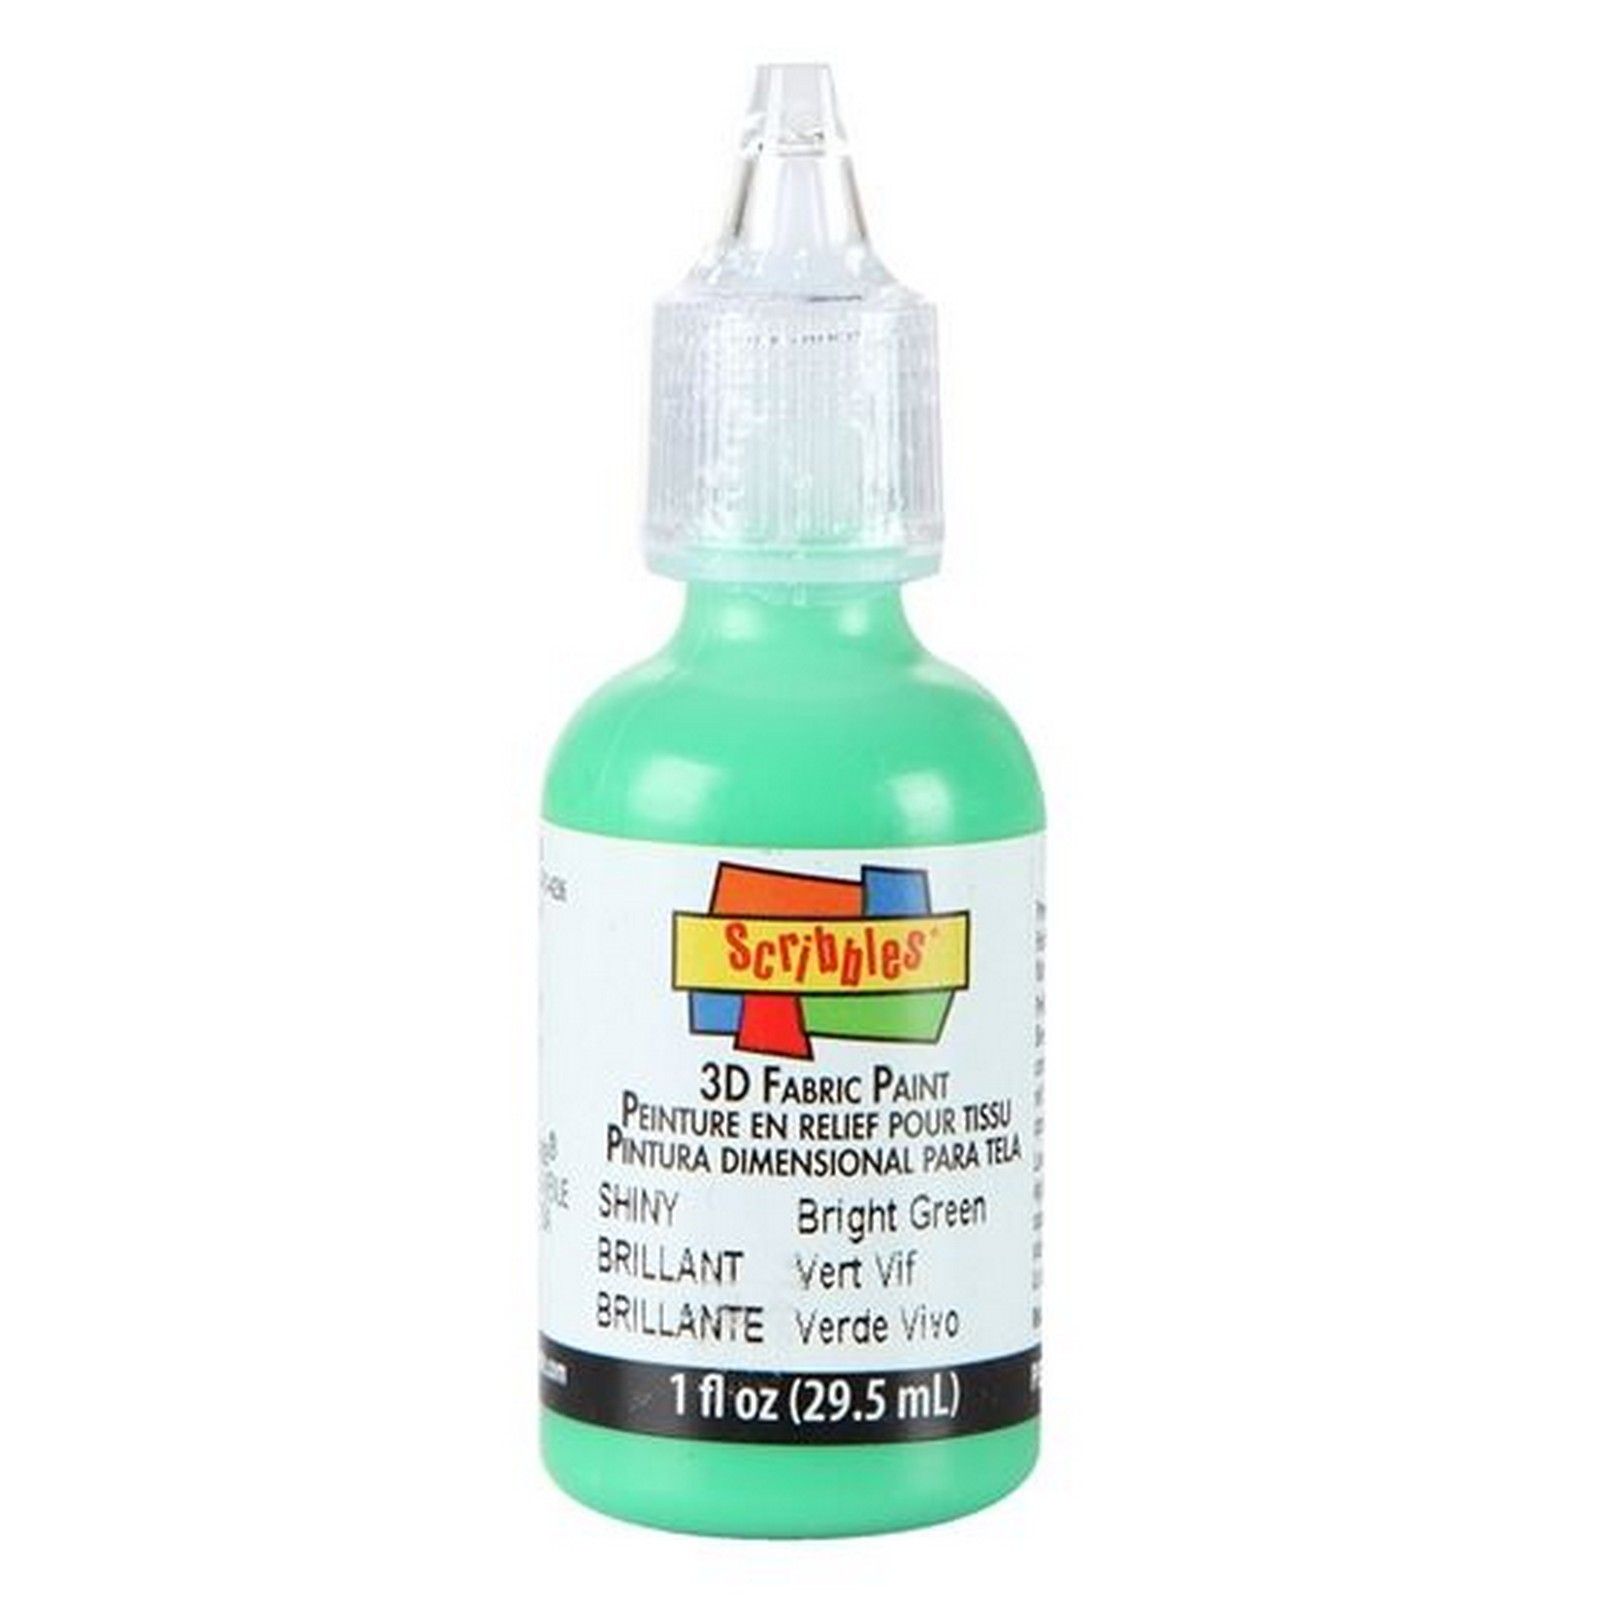 Scribbles • 3D Fabric Paint Shiny 29.5ml Bright Green